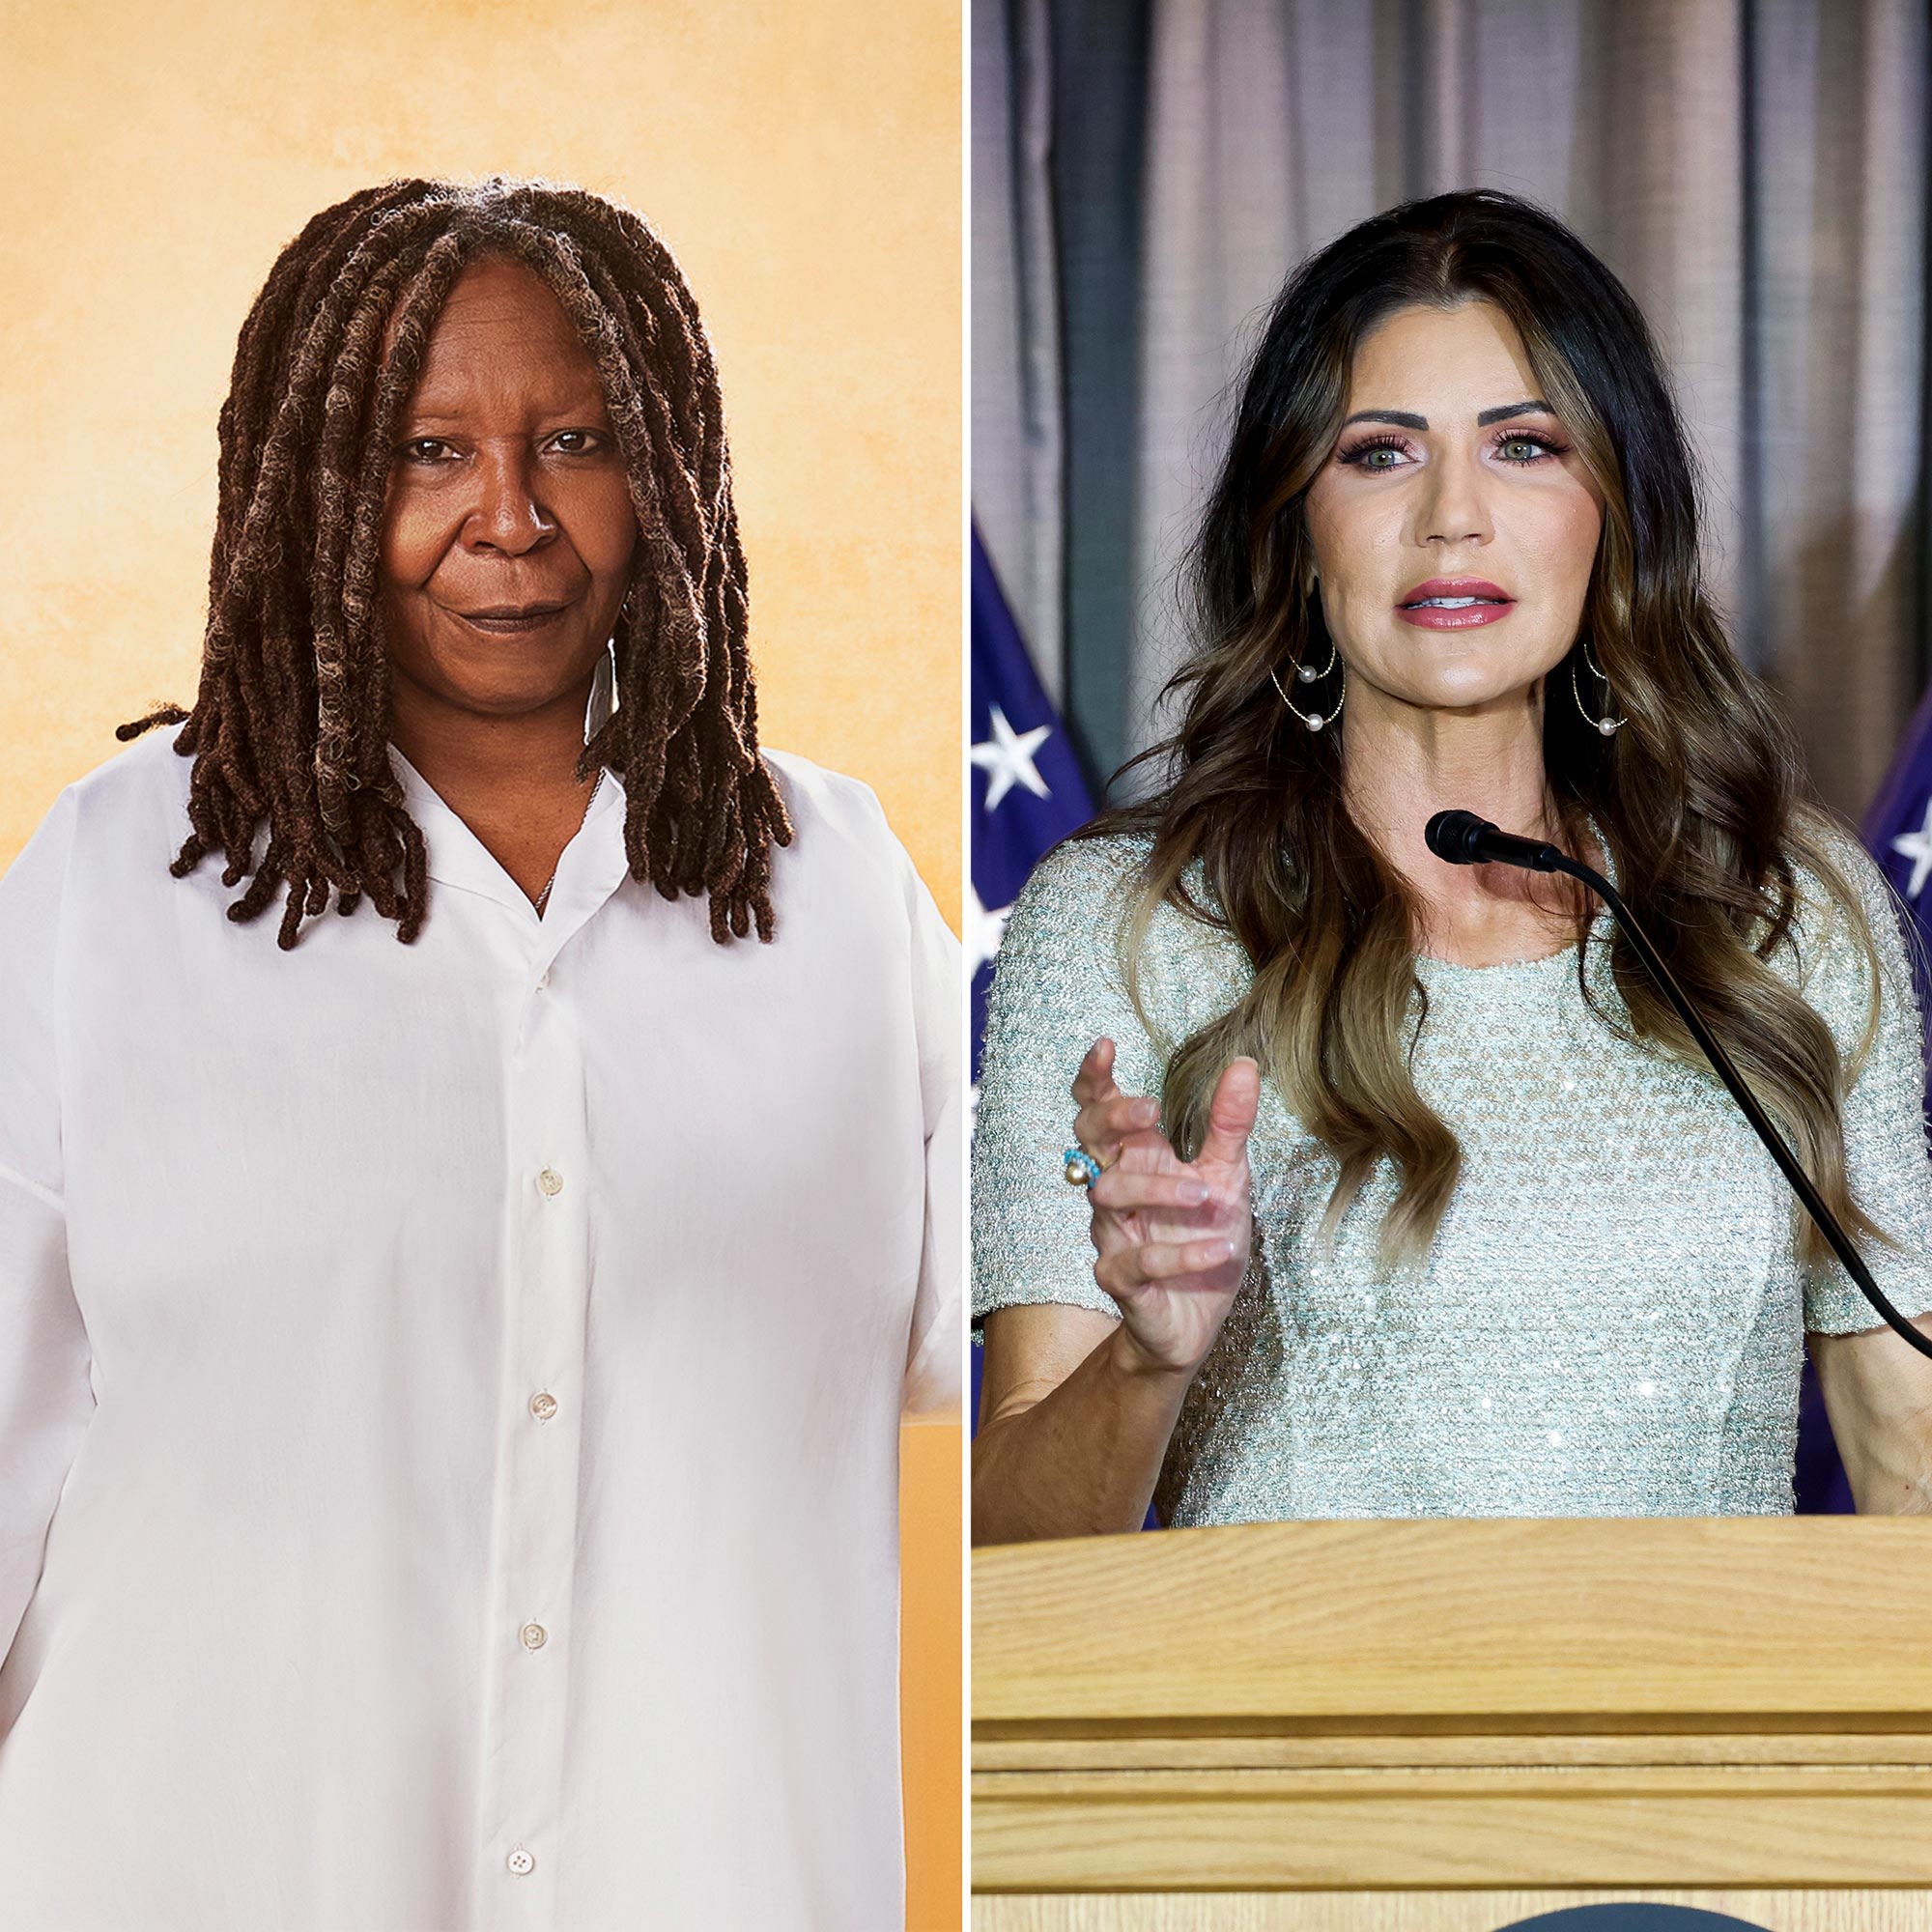 Whoopi Goldberg Trashes Kristi Noem for Shooting Puppy: 'Give It Back!'